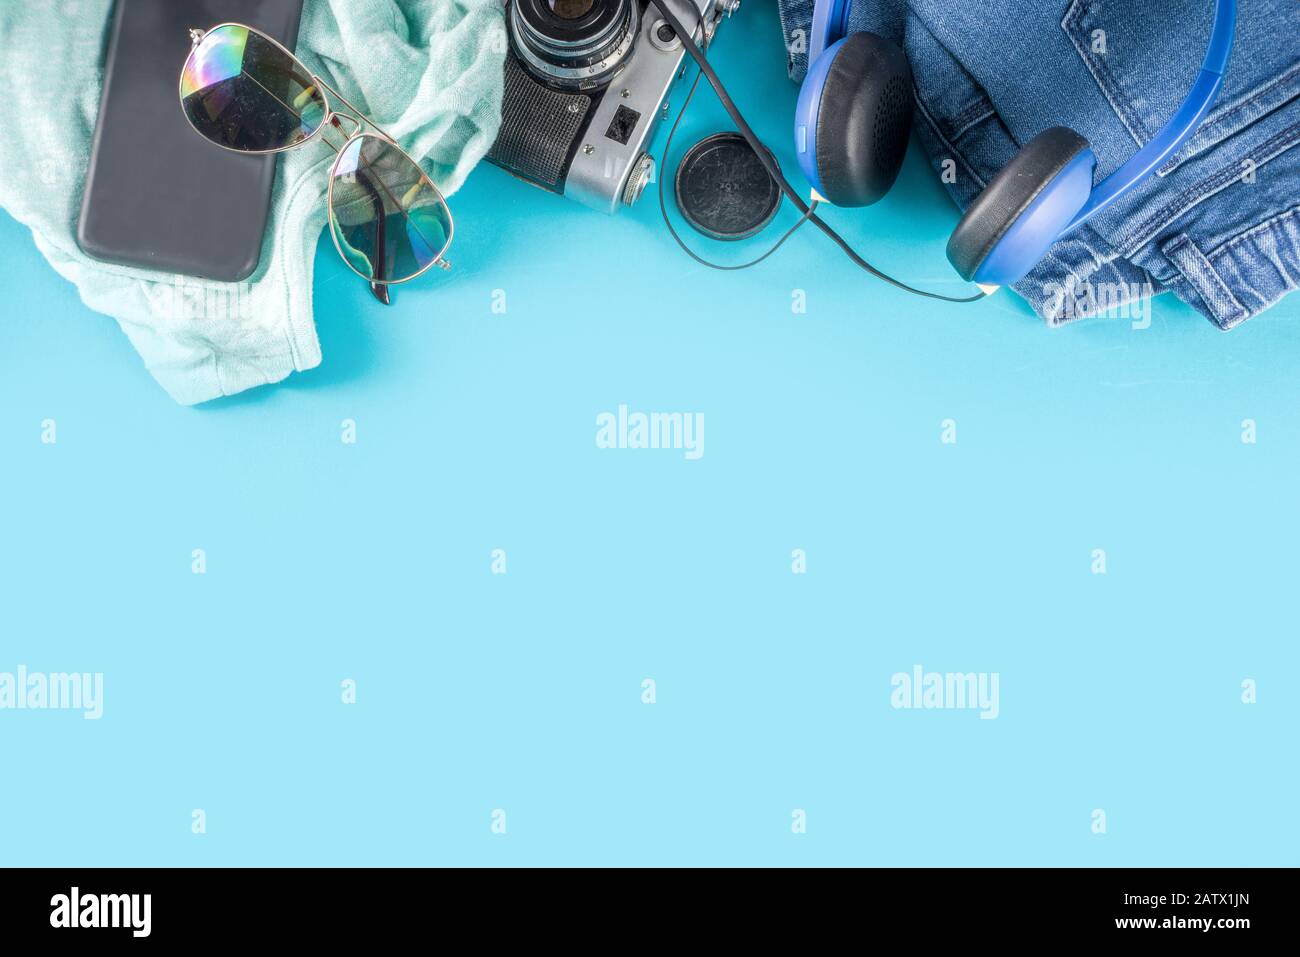 Stylish female spring autumn outfit and accessories on turquoise blue background, flat lay. Trendy girls clothes flatlay copy space top view Stock Photo